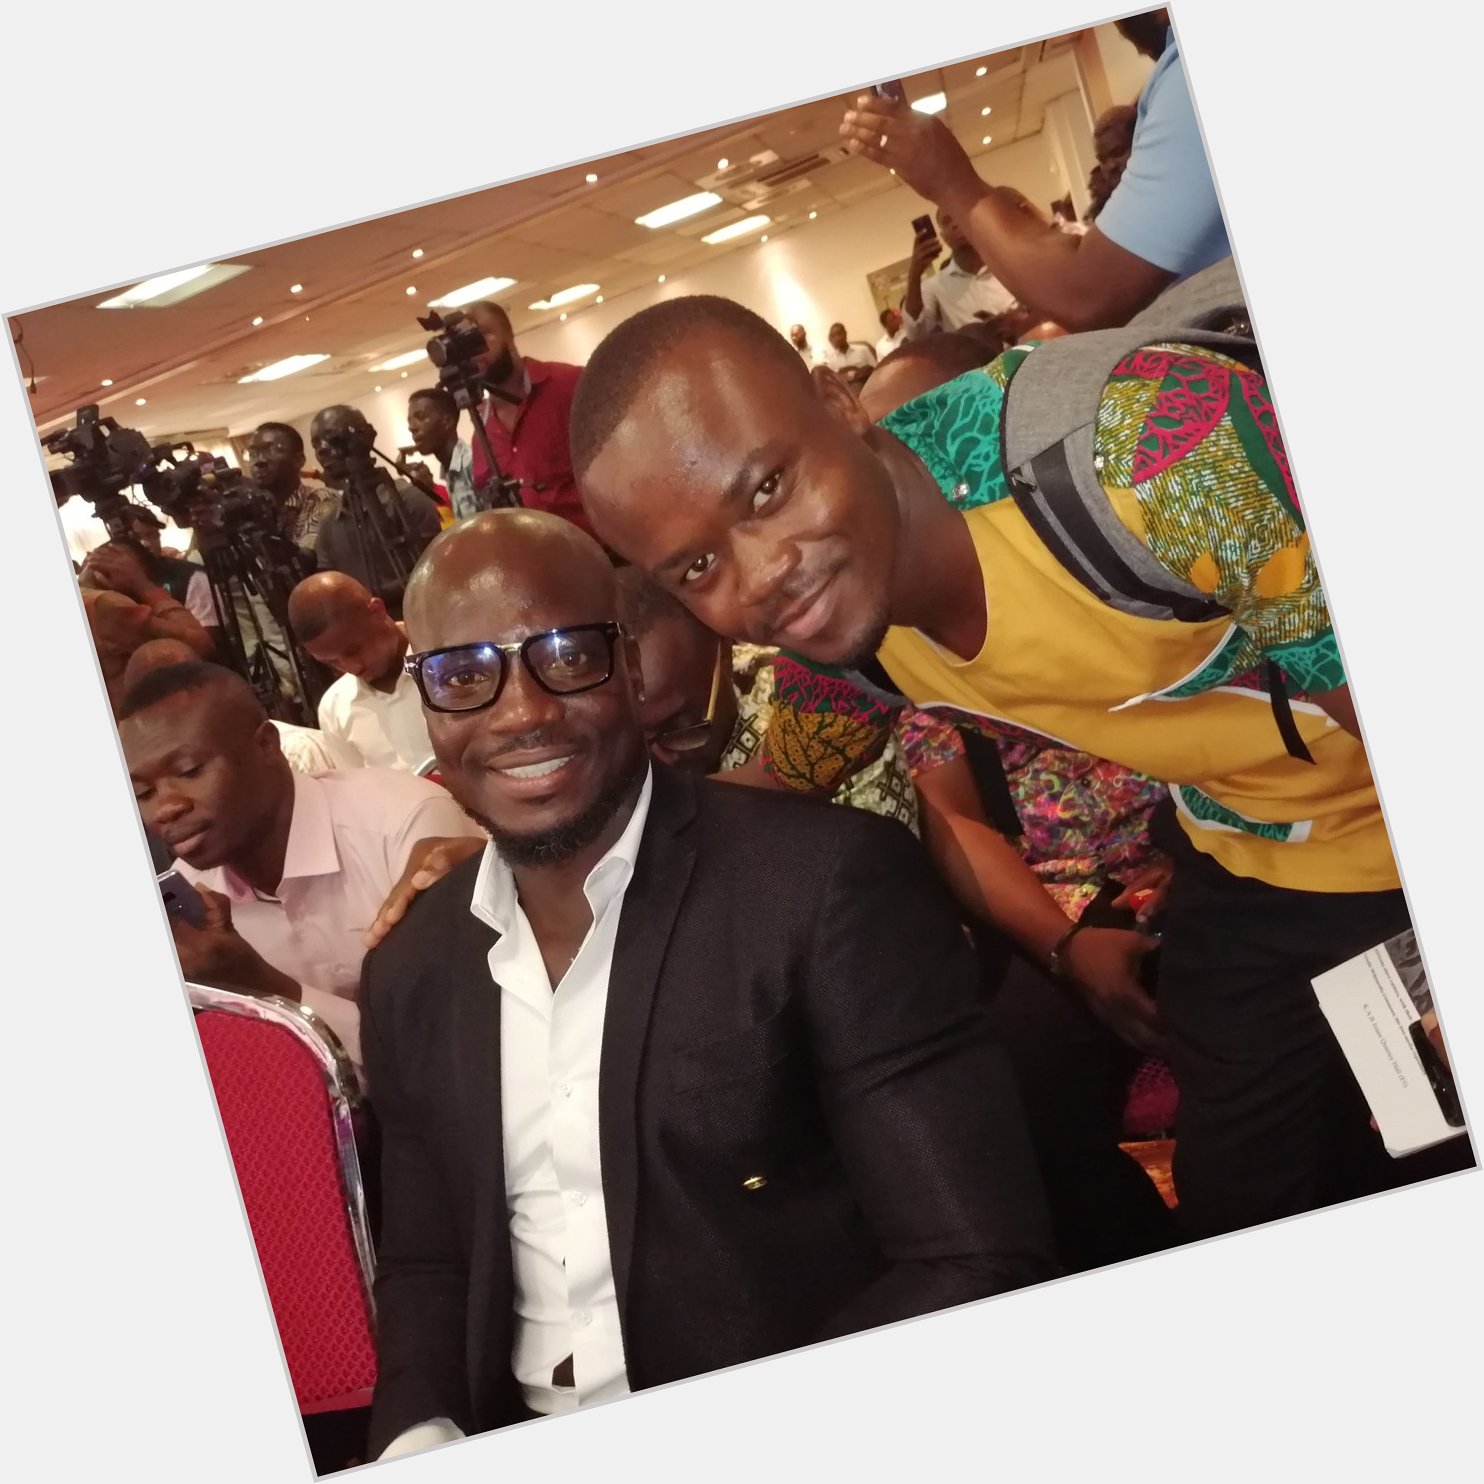 Happy birthday to Stephen Appiah

Big guy but always humble

God bless your new age Capito. 